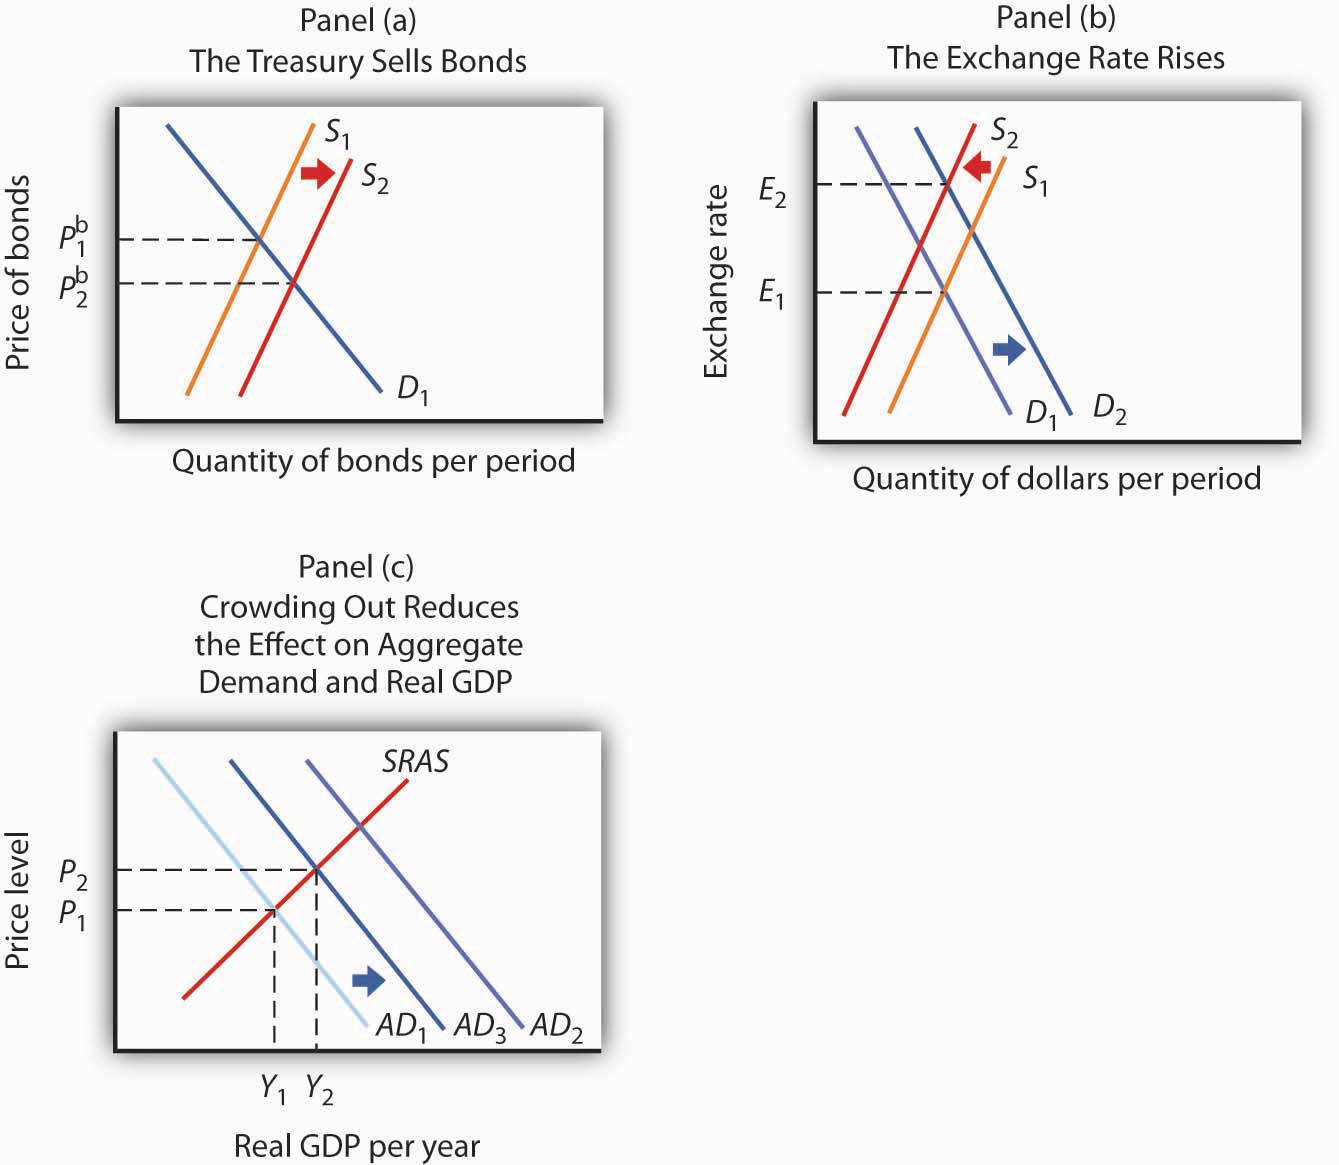 An Expansionary Fiscal Policy and Crowding Out